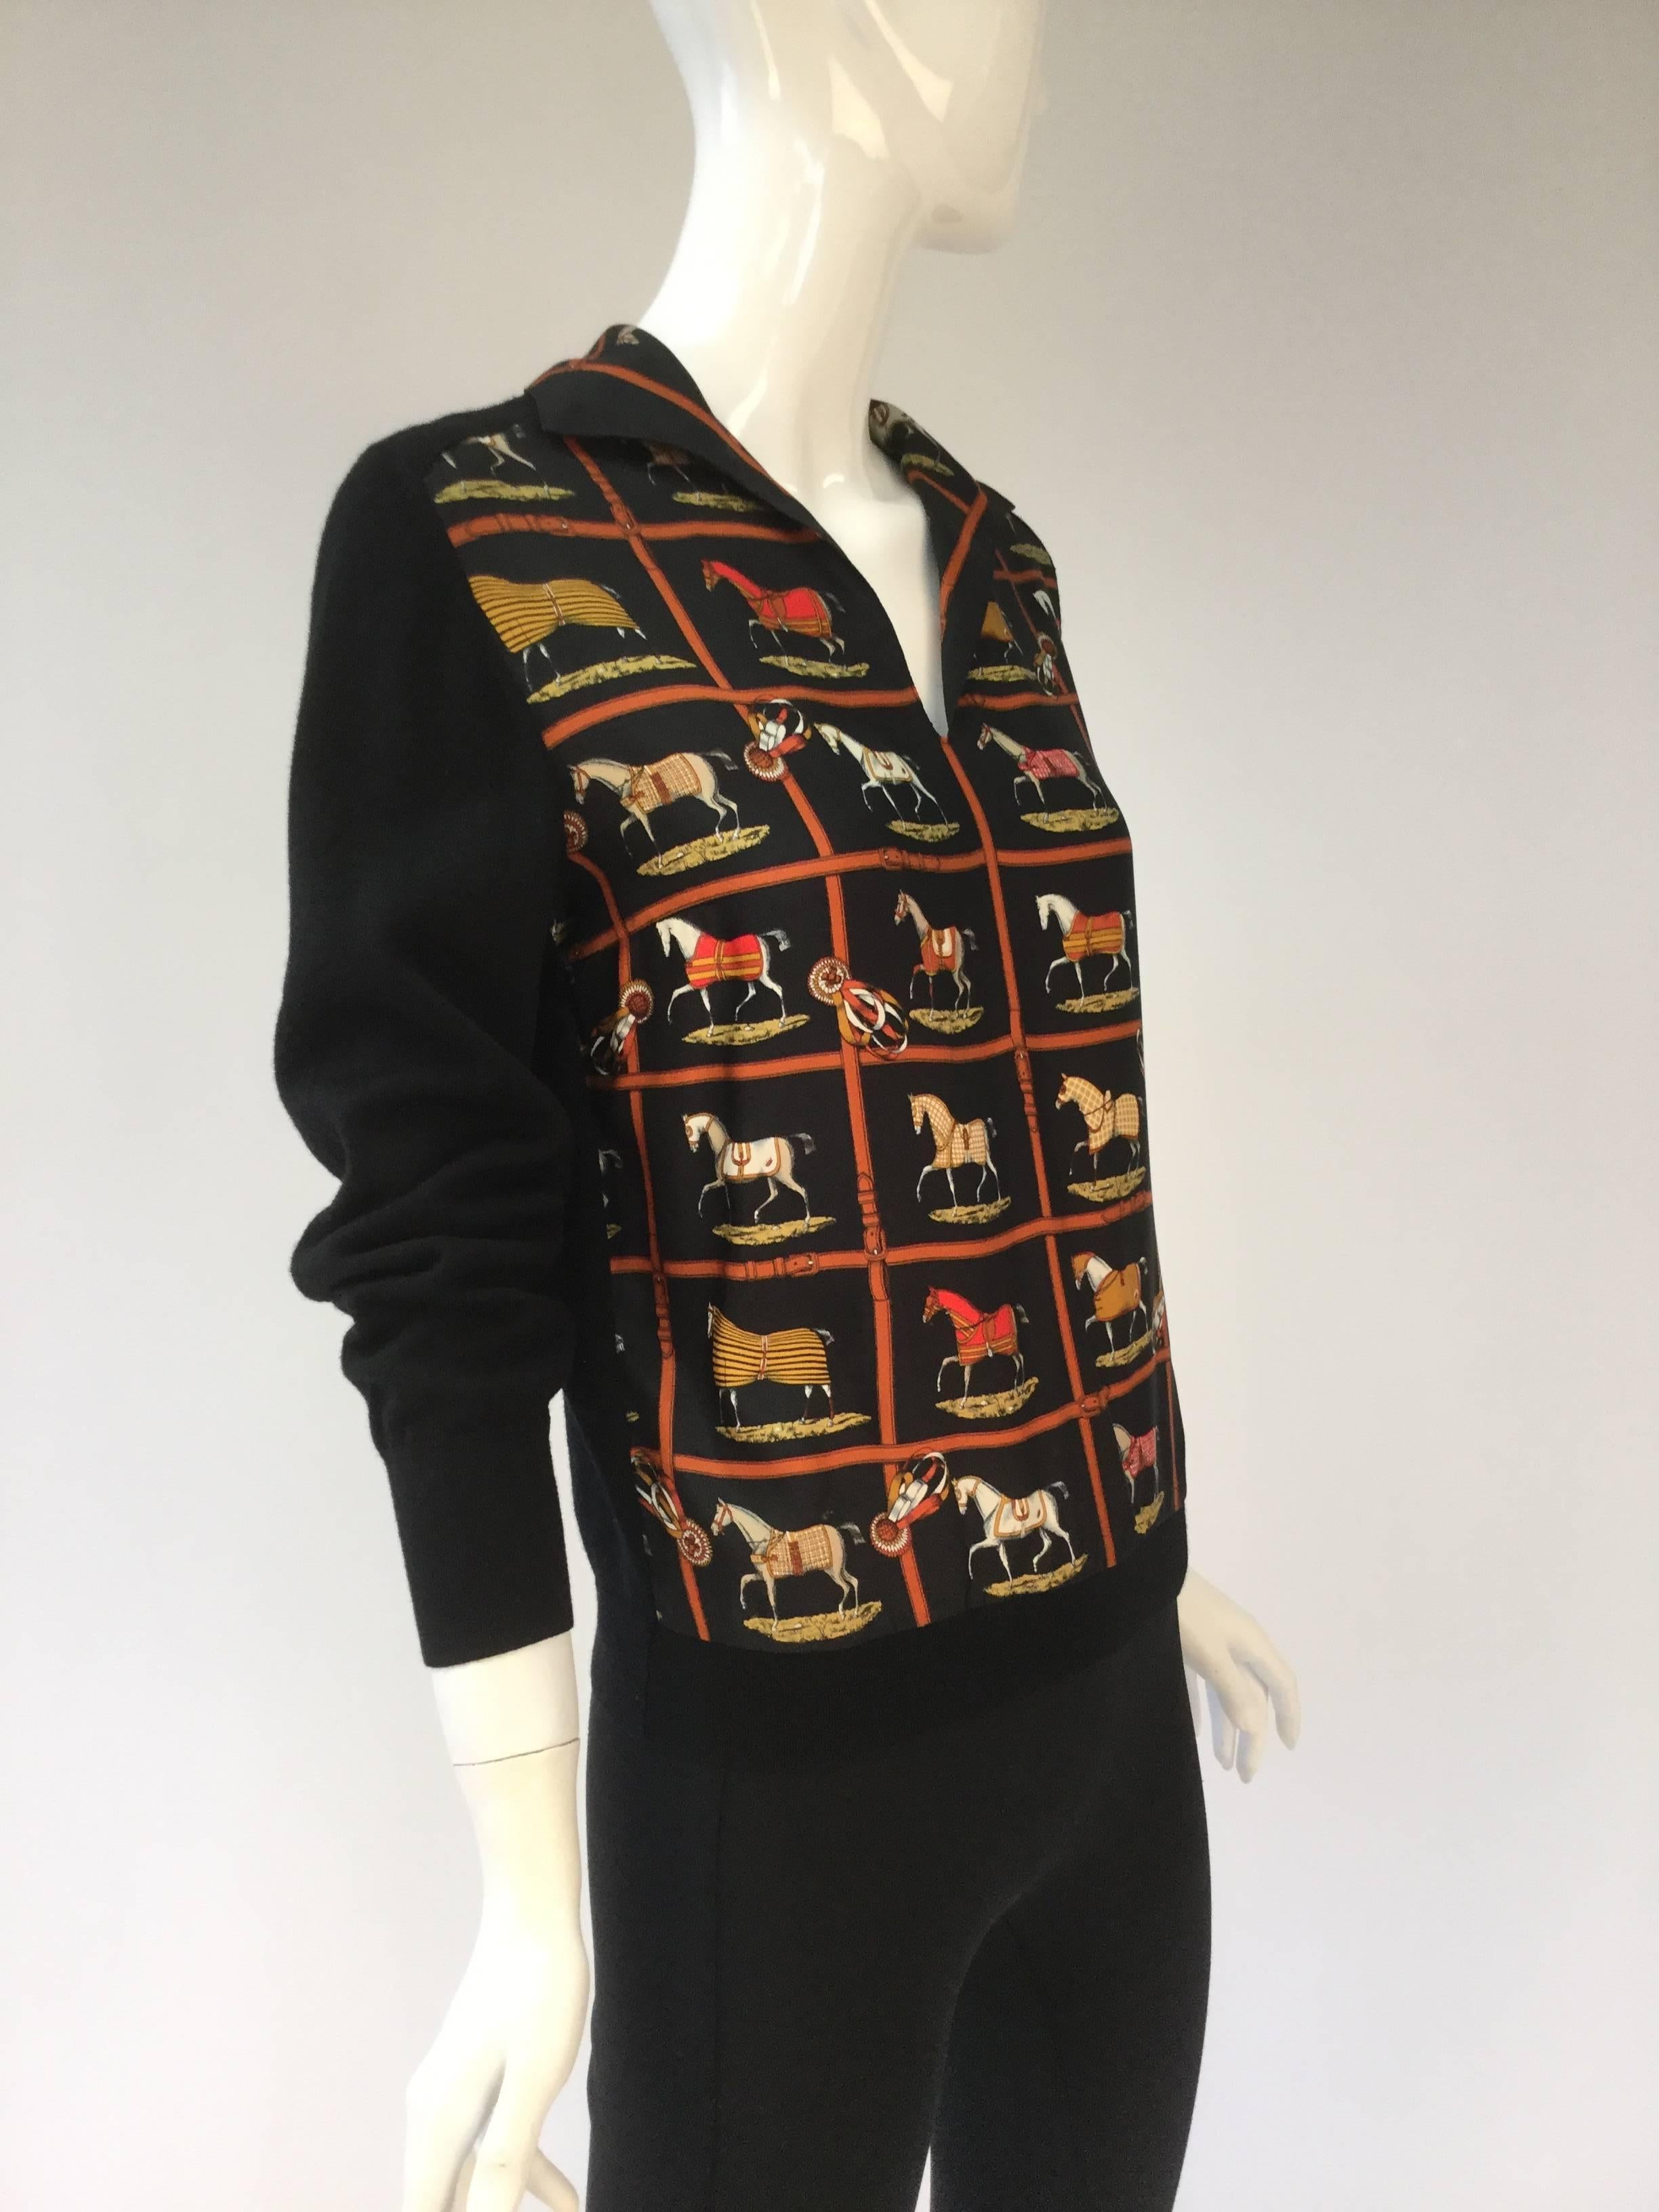 Classic sweater with the beloved Jaques Eudel scarf print designed in 1974 as its front.   Silk collar, neck dips into a v back and sleeves made of wool.  We beleive the scarf print was turned into a sweater in the 1980's by Hermes and sold.* 

This